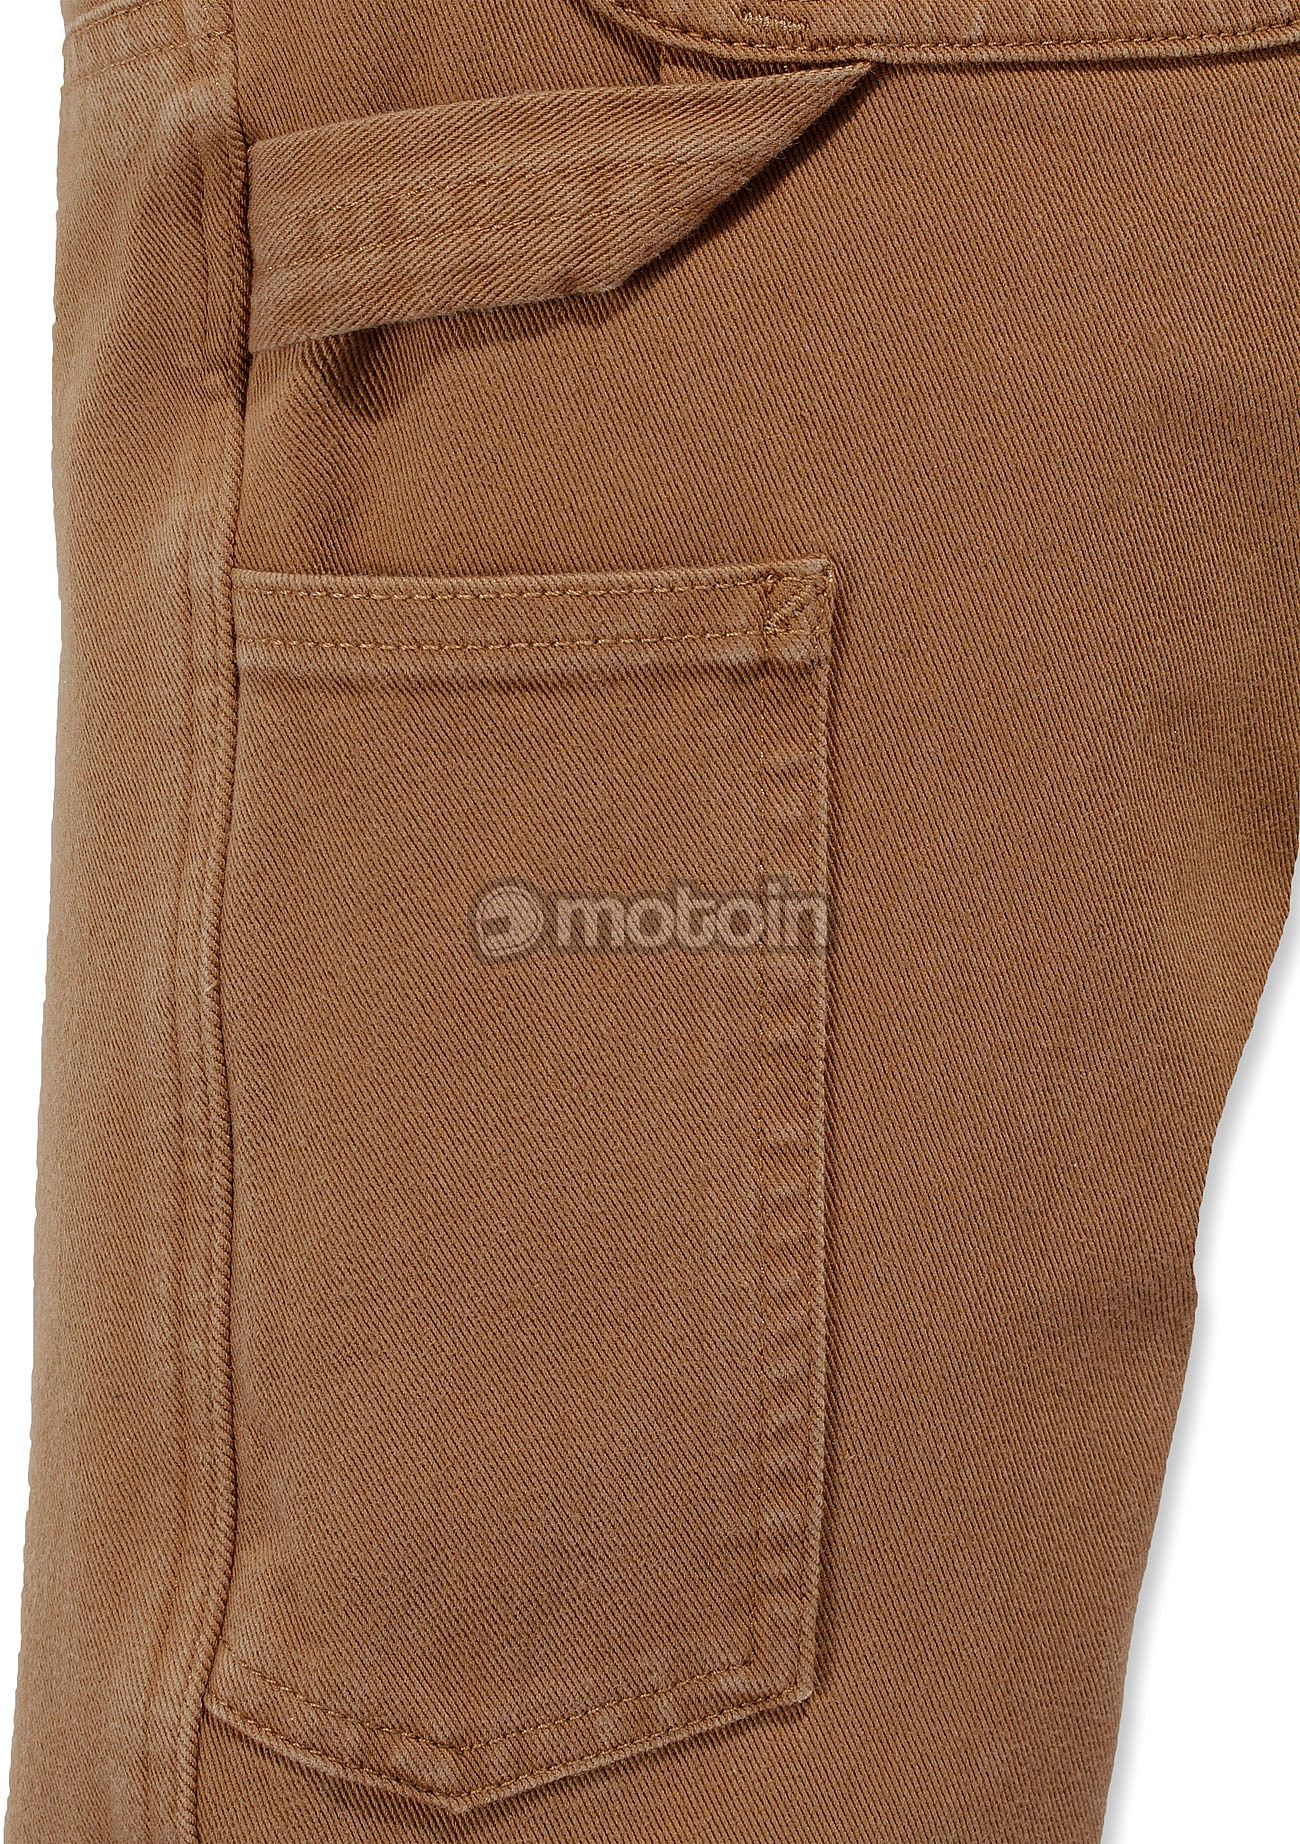 Carhartt Twill Double Front, textile pants women 